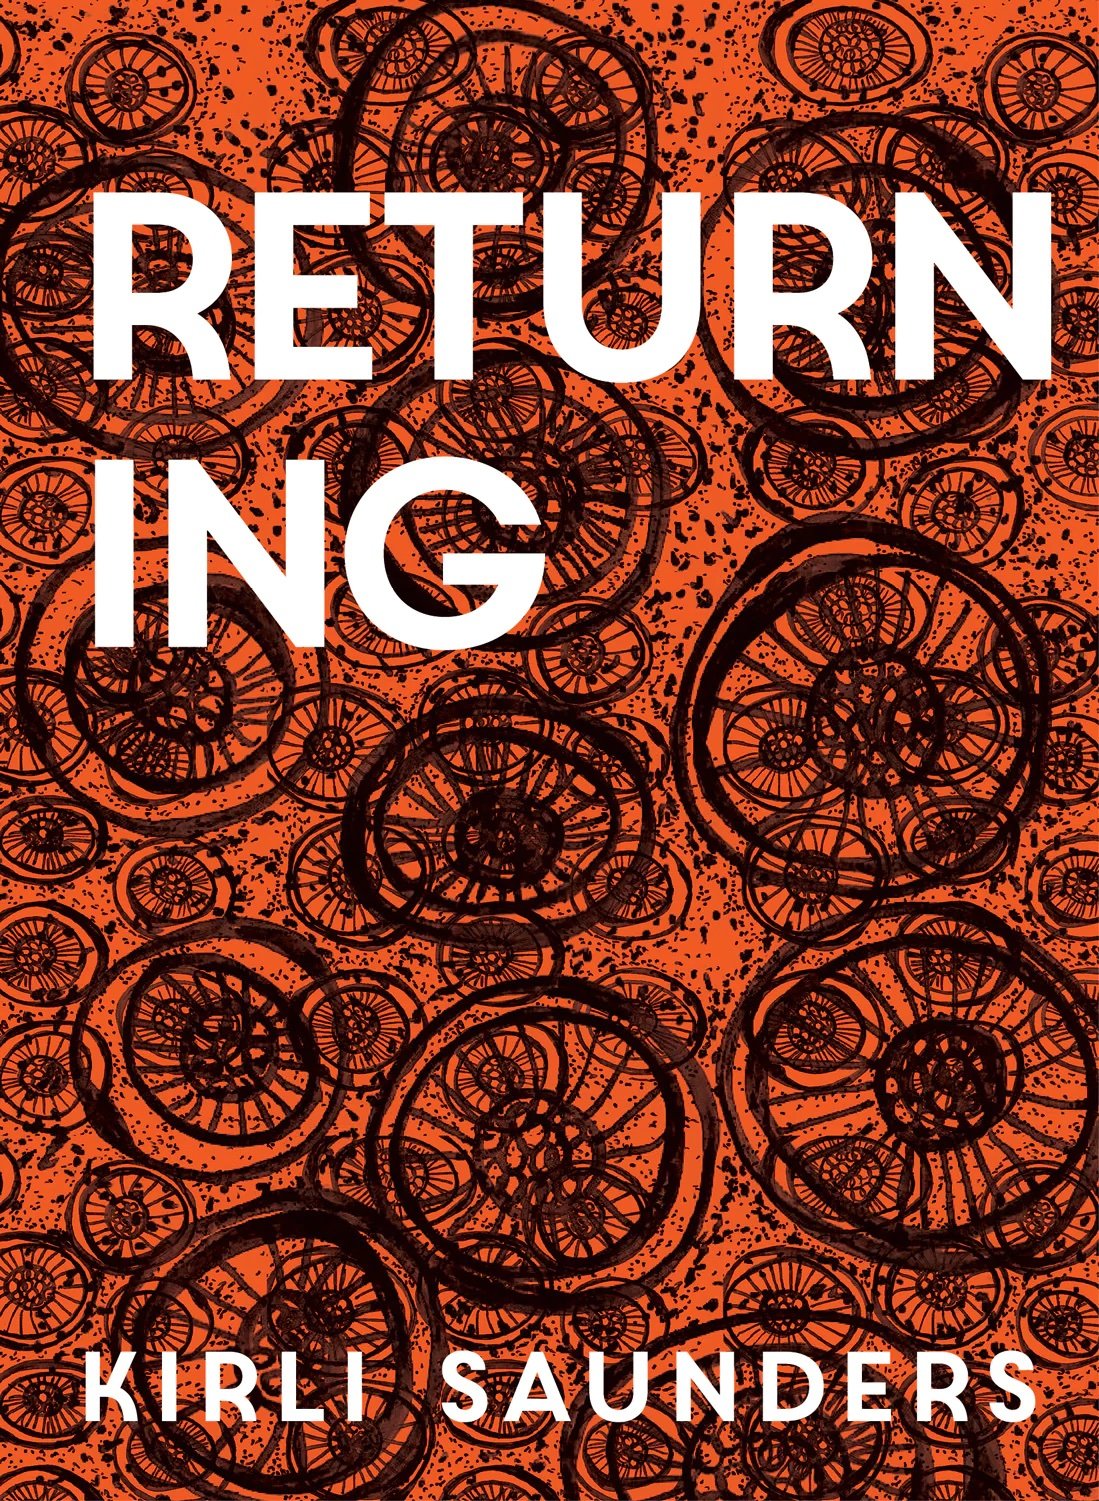 A brown book cover with black circular patterns. The title word is in large white block letters spread across two lines at the top of the page